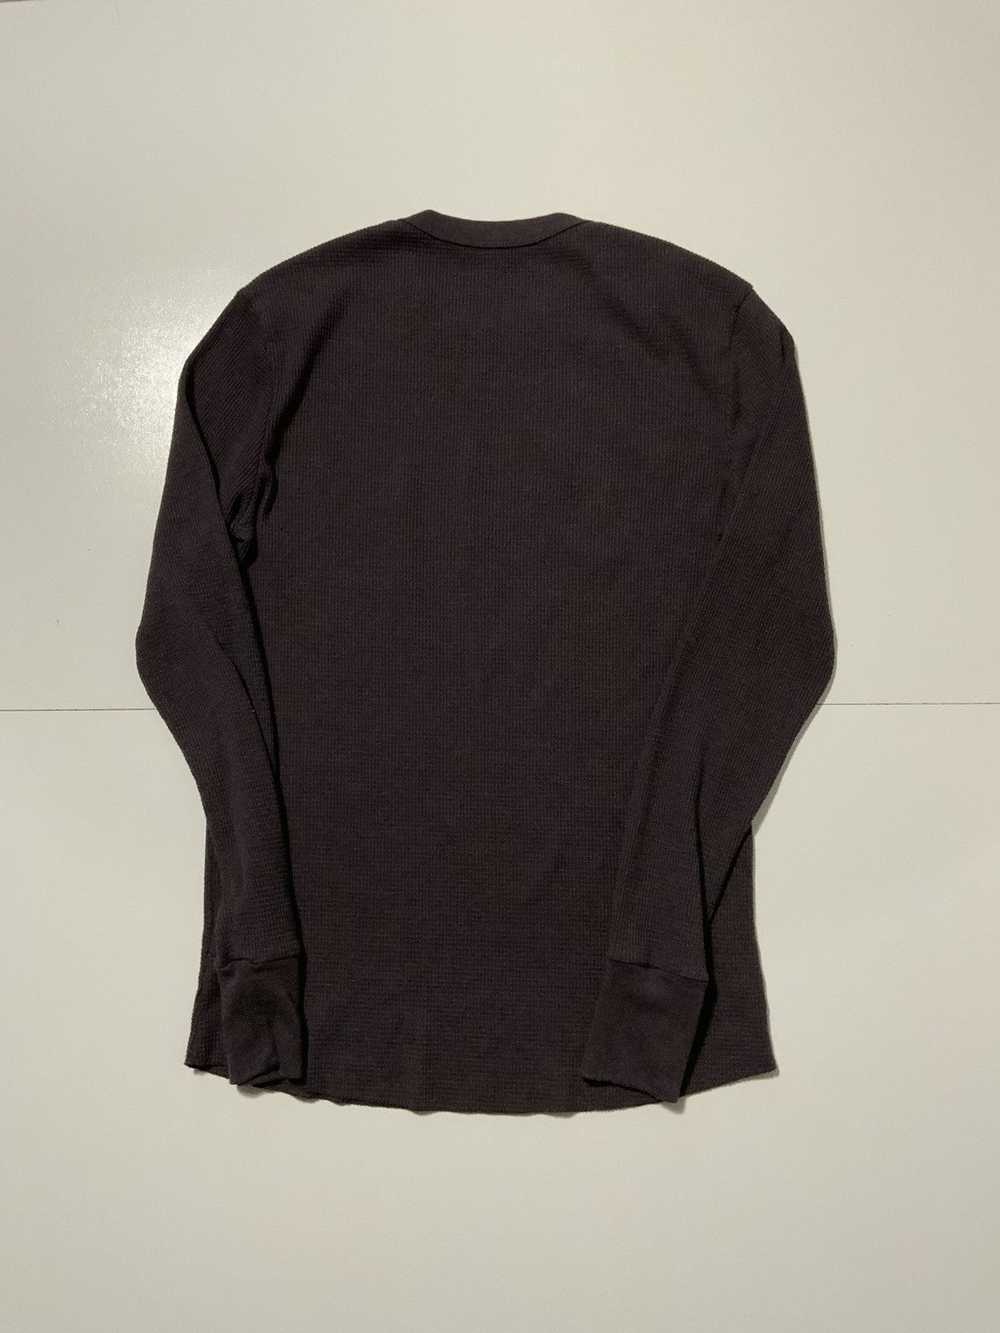 Gustin Gustin Waffle Knit Thermal Dyed L/S Pullov… - image 2